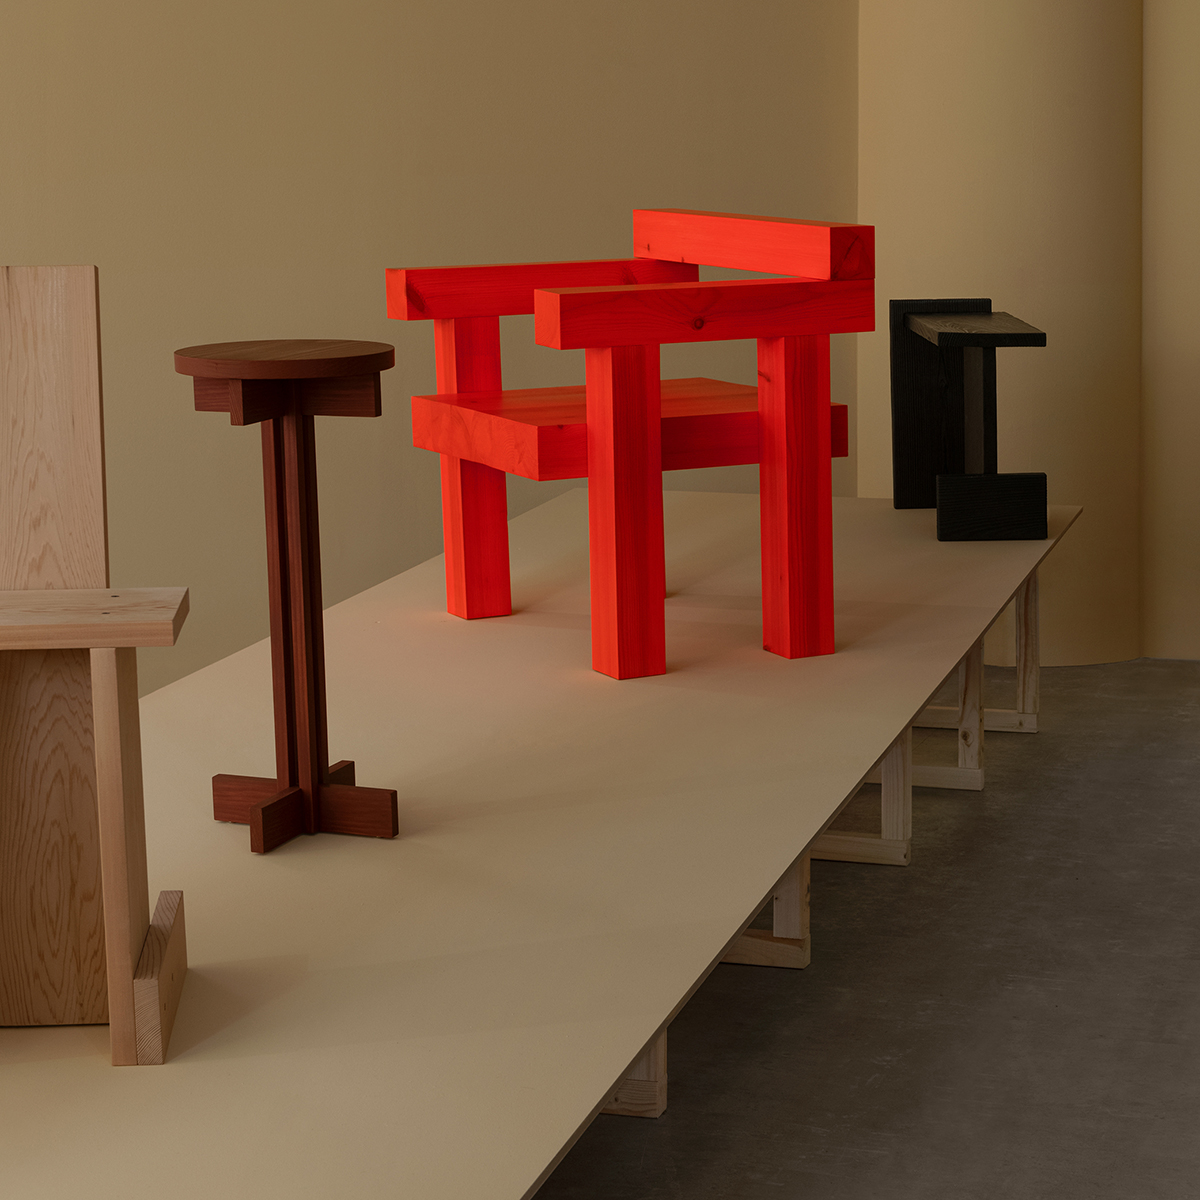 Swedish Design Movement goes virtual! New exhibition launched at